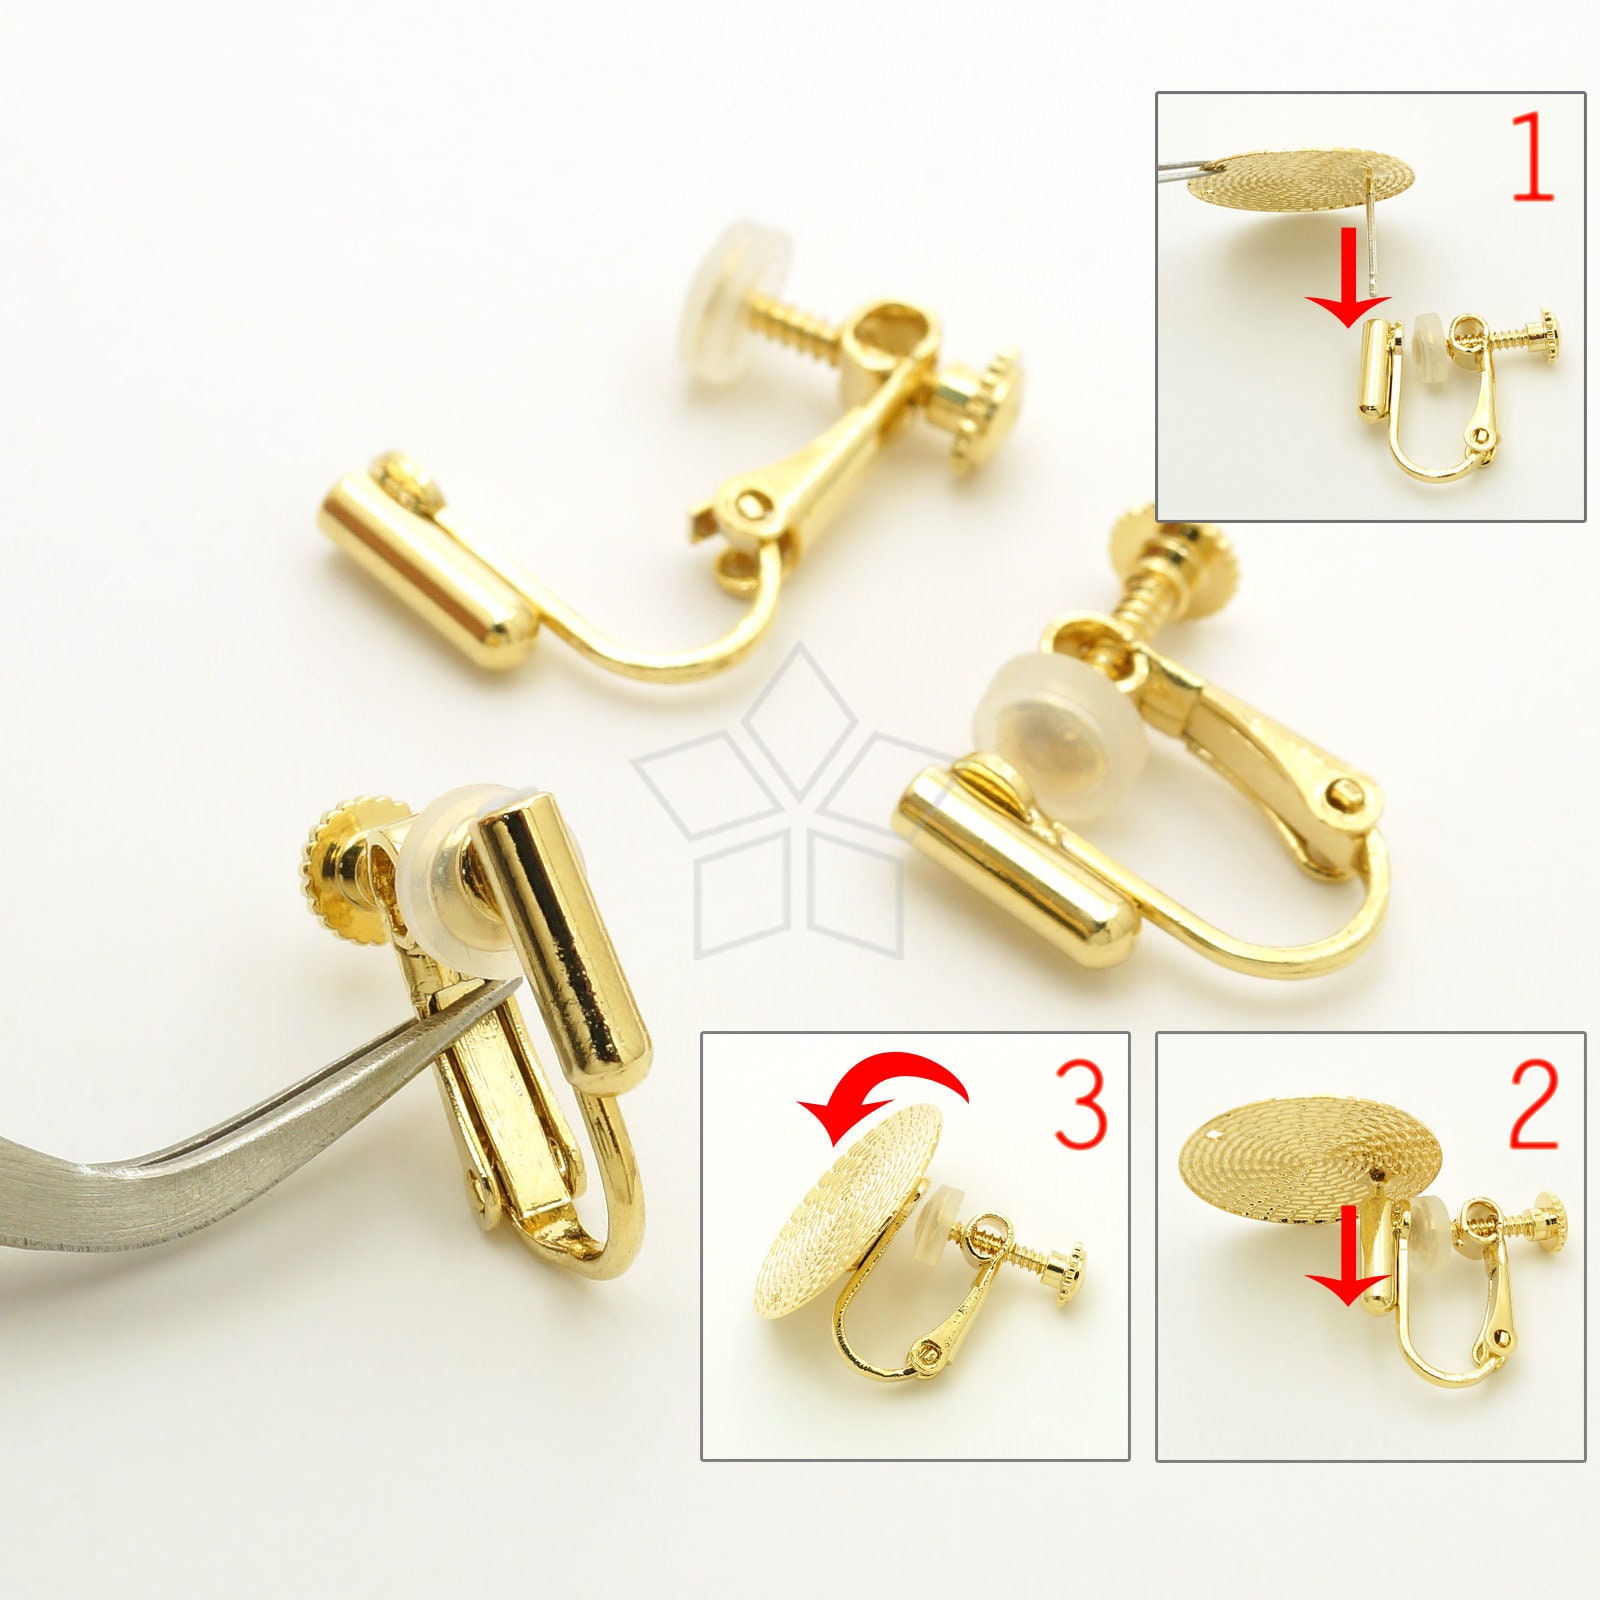 Earring Converters, Pierced to Clip on Earrings, Bridal Clip on Earrings, Earrings Adaptors, Gold, Rose Gold or Silver